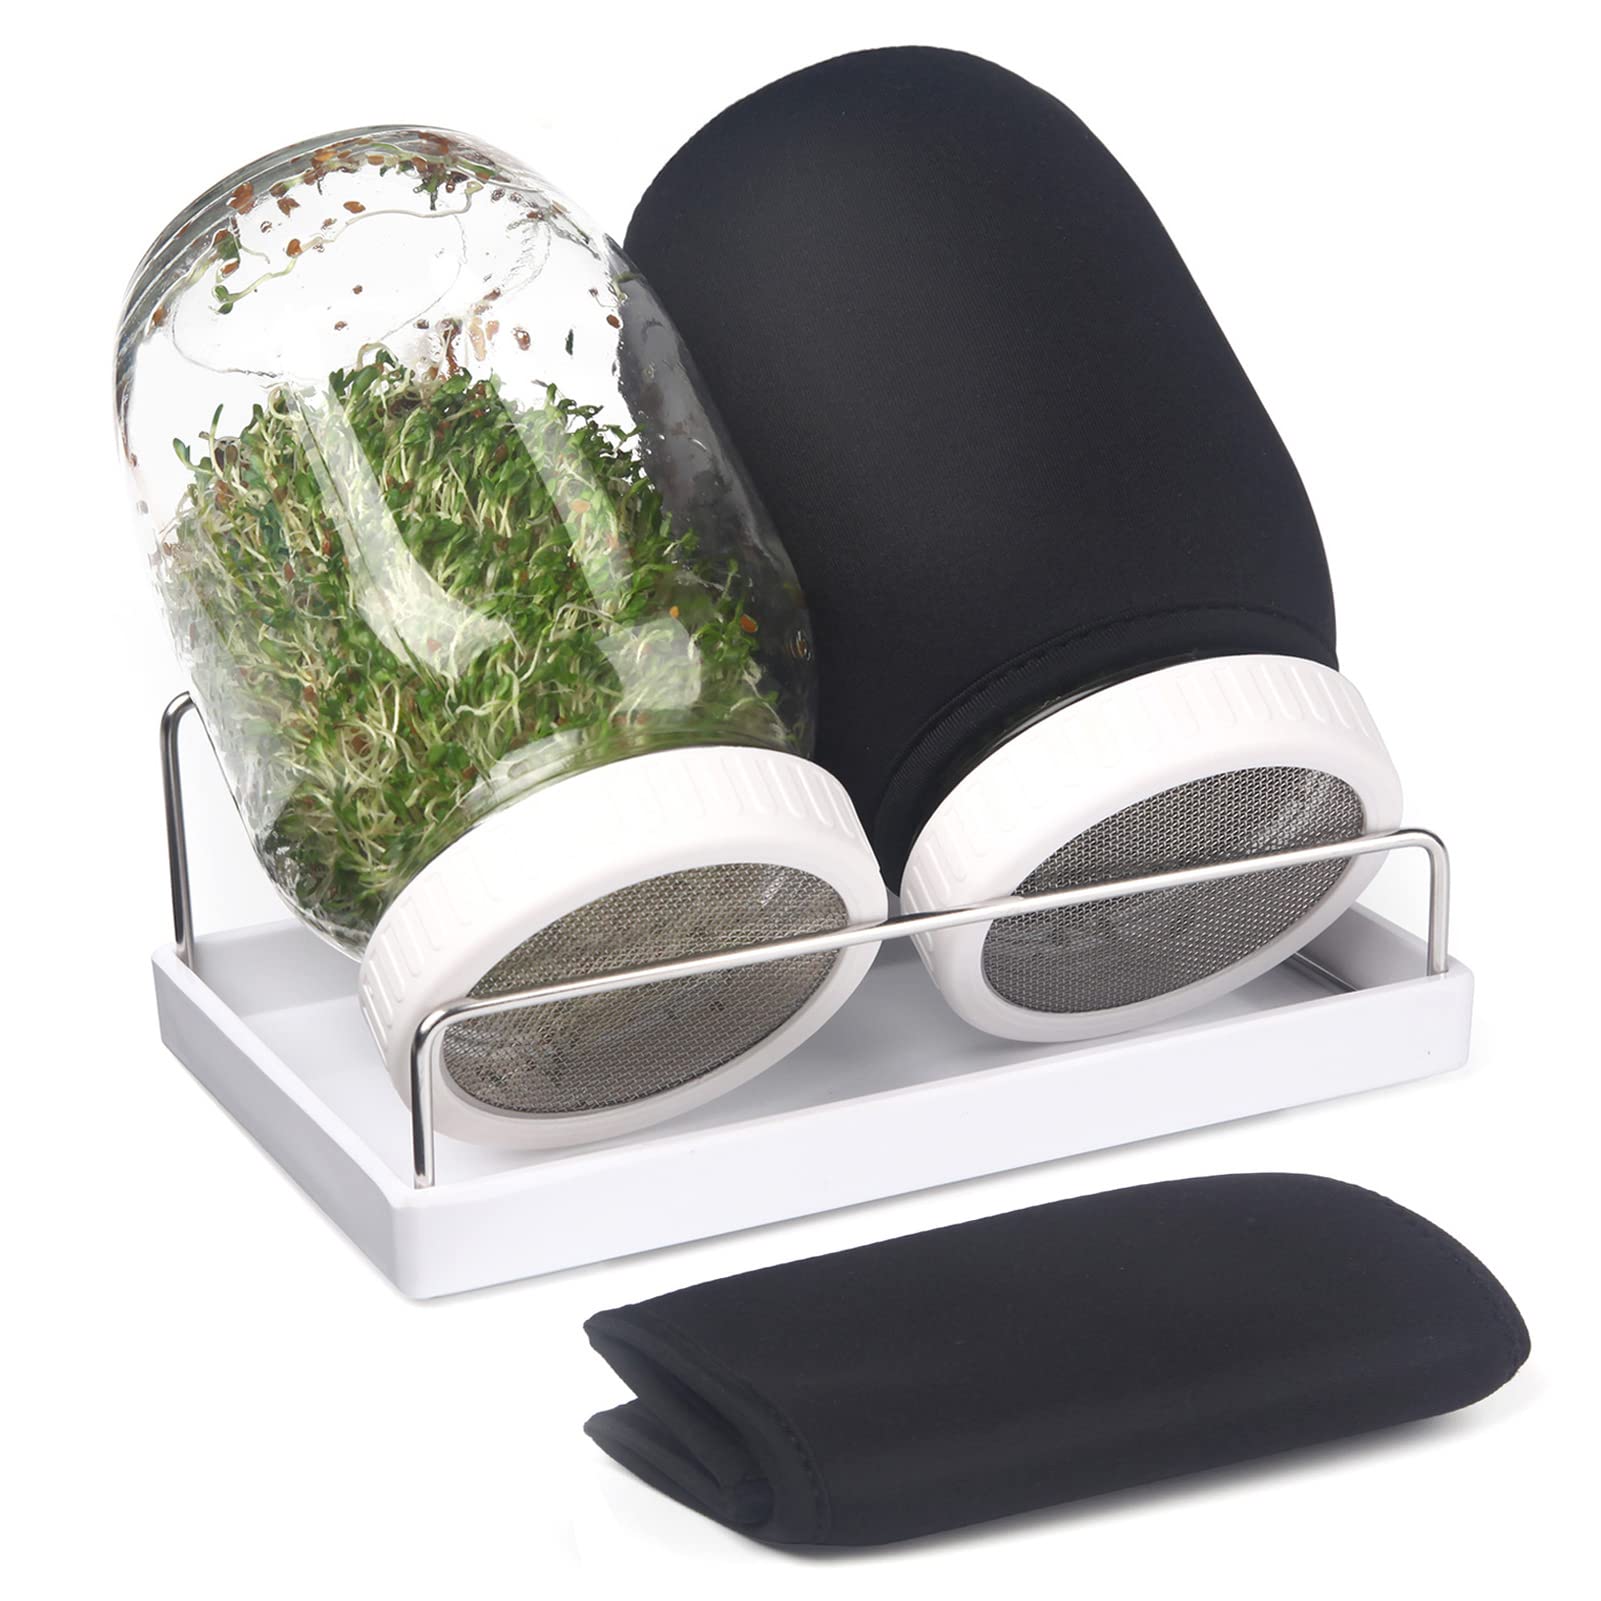 Complete Sprouting Jar Kit| 2 Wide Mouth Mason Jars, 316 Screen Sprout Lids, Blackout Sleeves, Tray, Stand| Sprouter Set for Growing Broccoli, Alfalfa and More-Seeds not Included